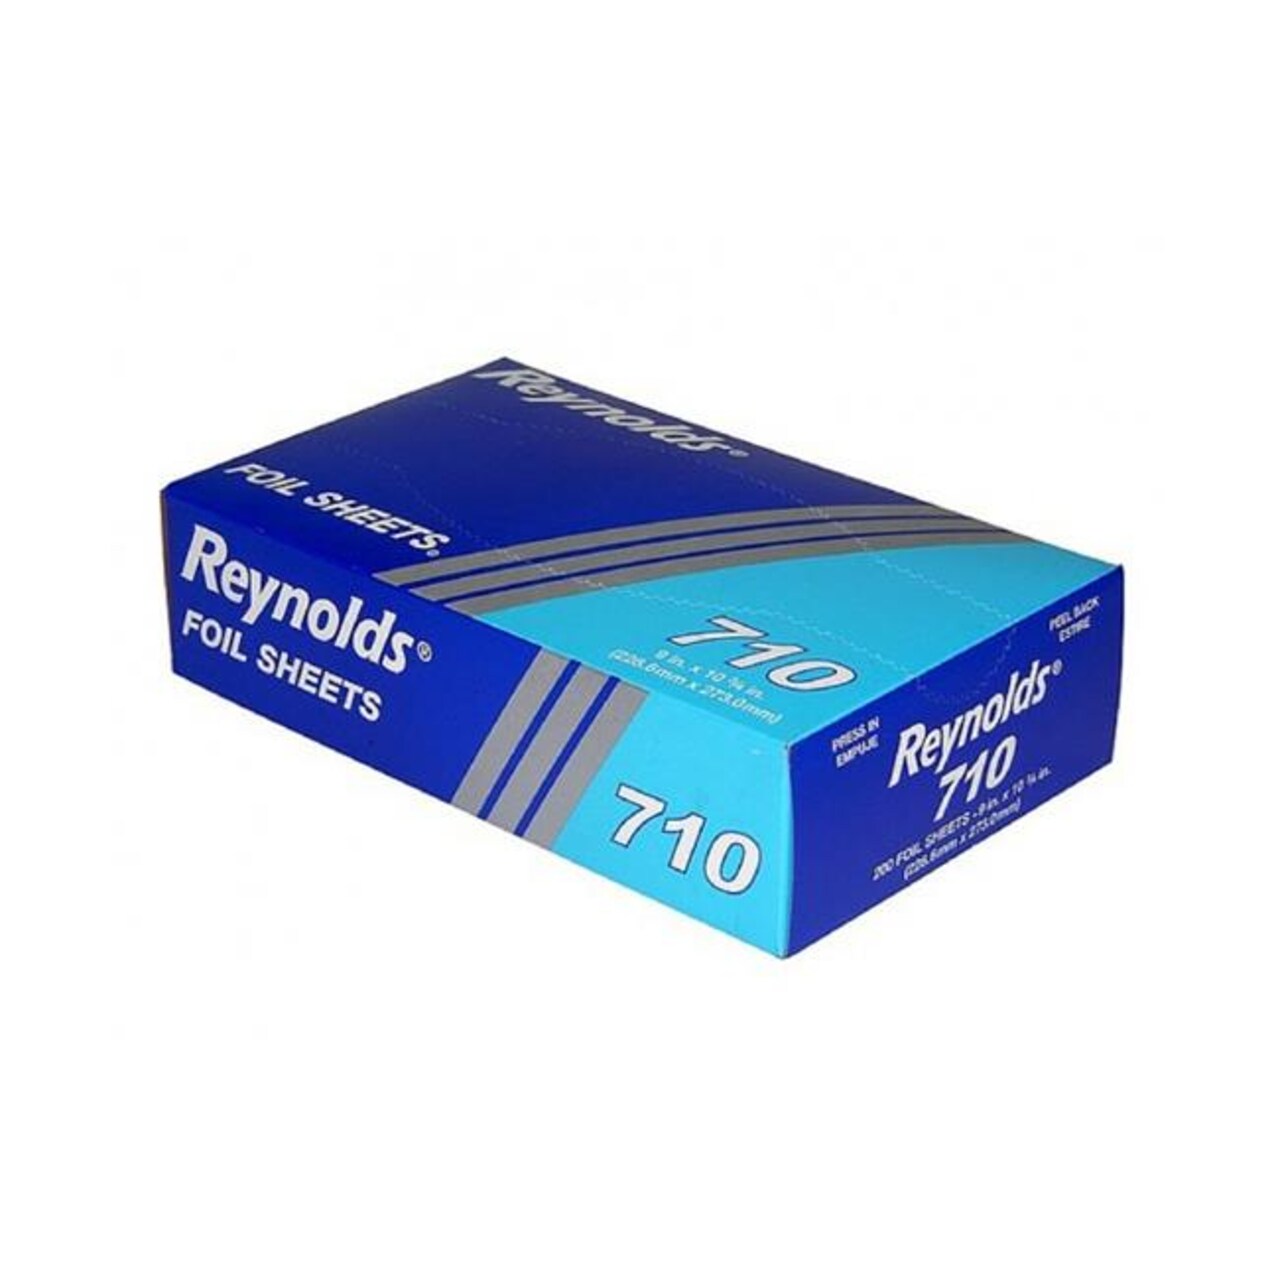 Reynolds 710 CPC 9 x 10.75 in. Interfolded Aluminum Foil Sheets - 200 Sheet  per Box & Case of 2400